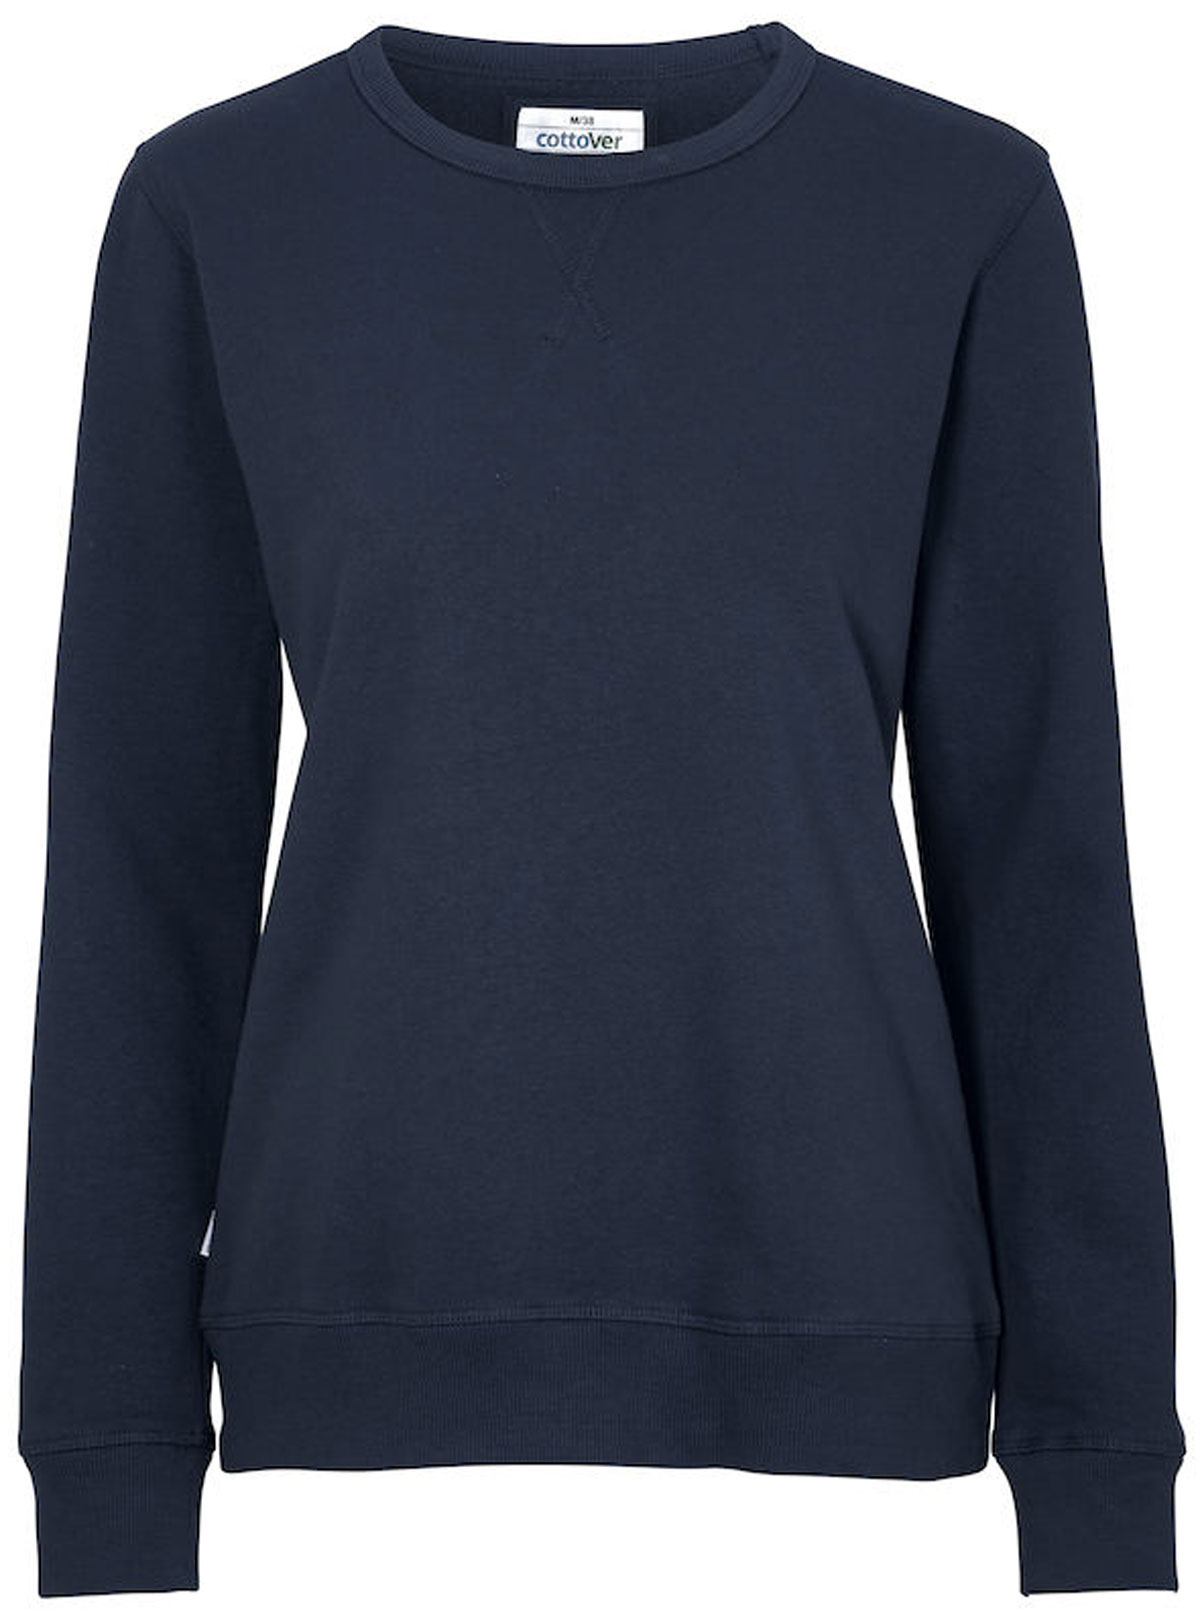 Cottover 141004 Crew Neck Lady 100% Organic Baumwolle